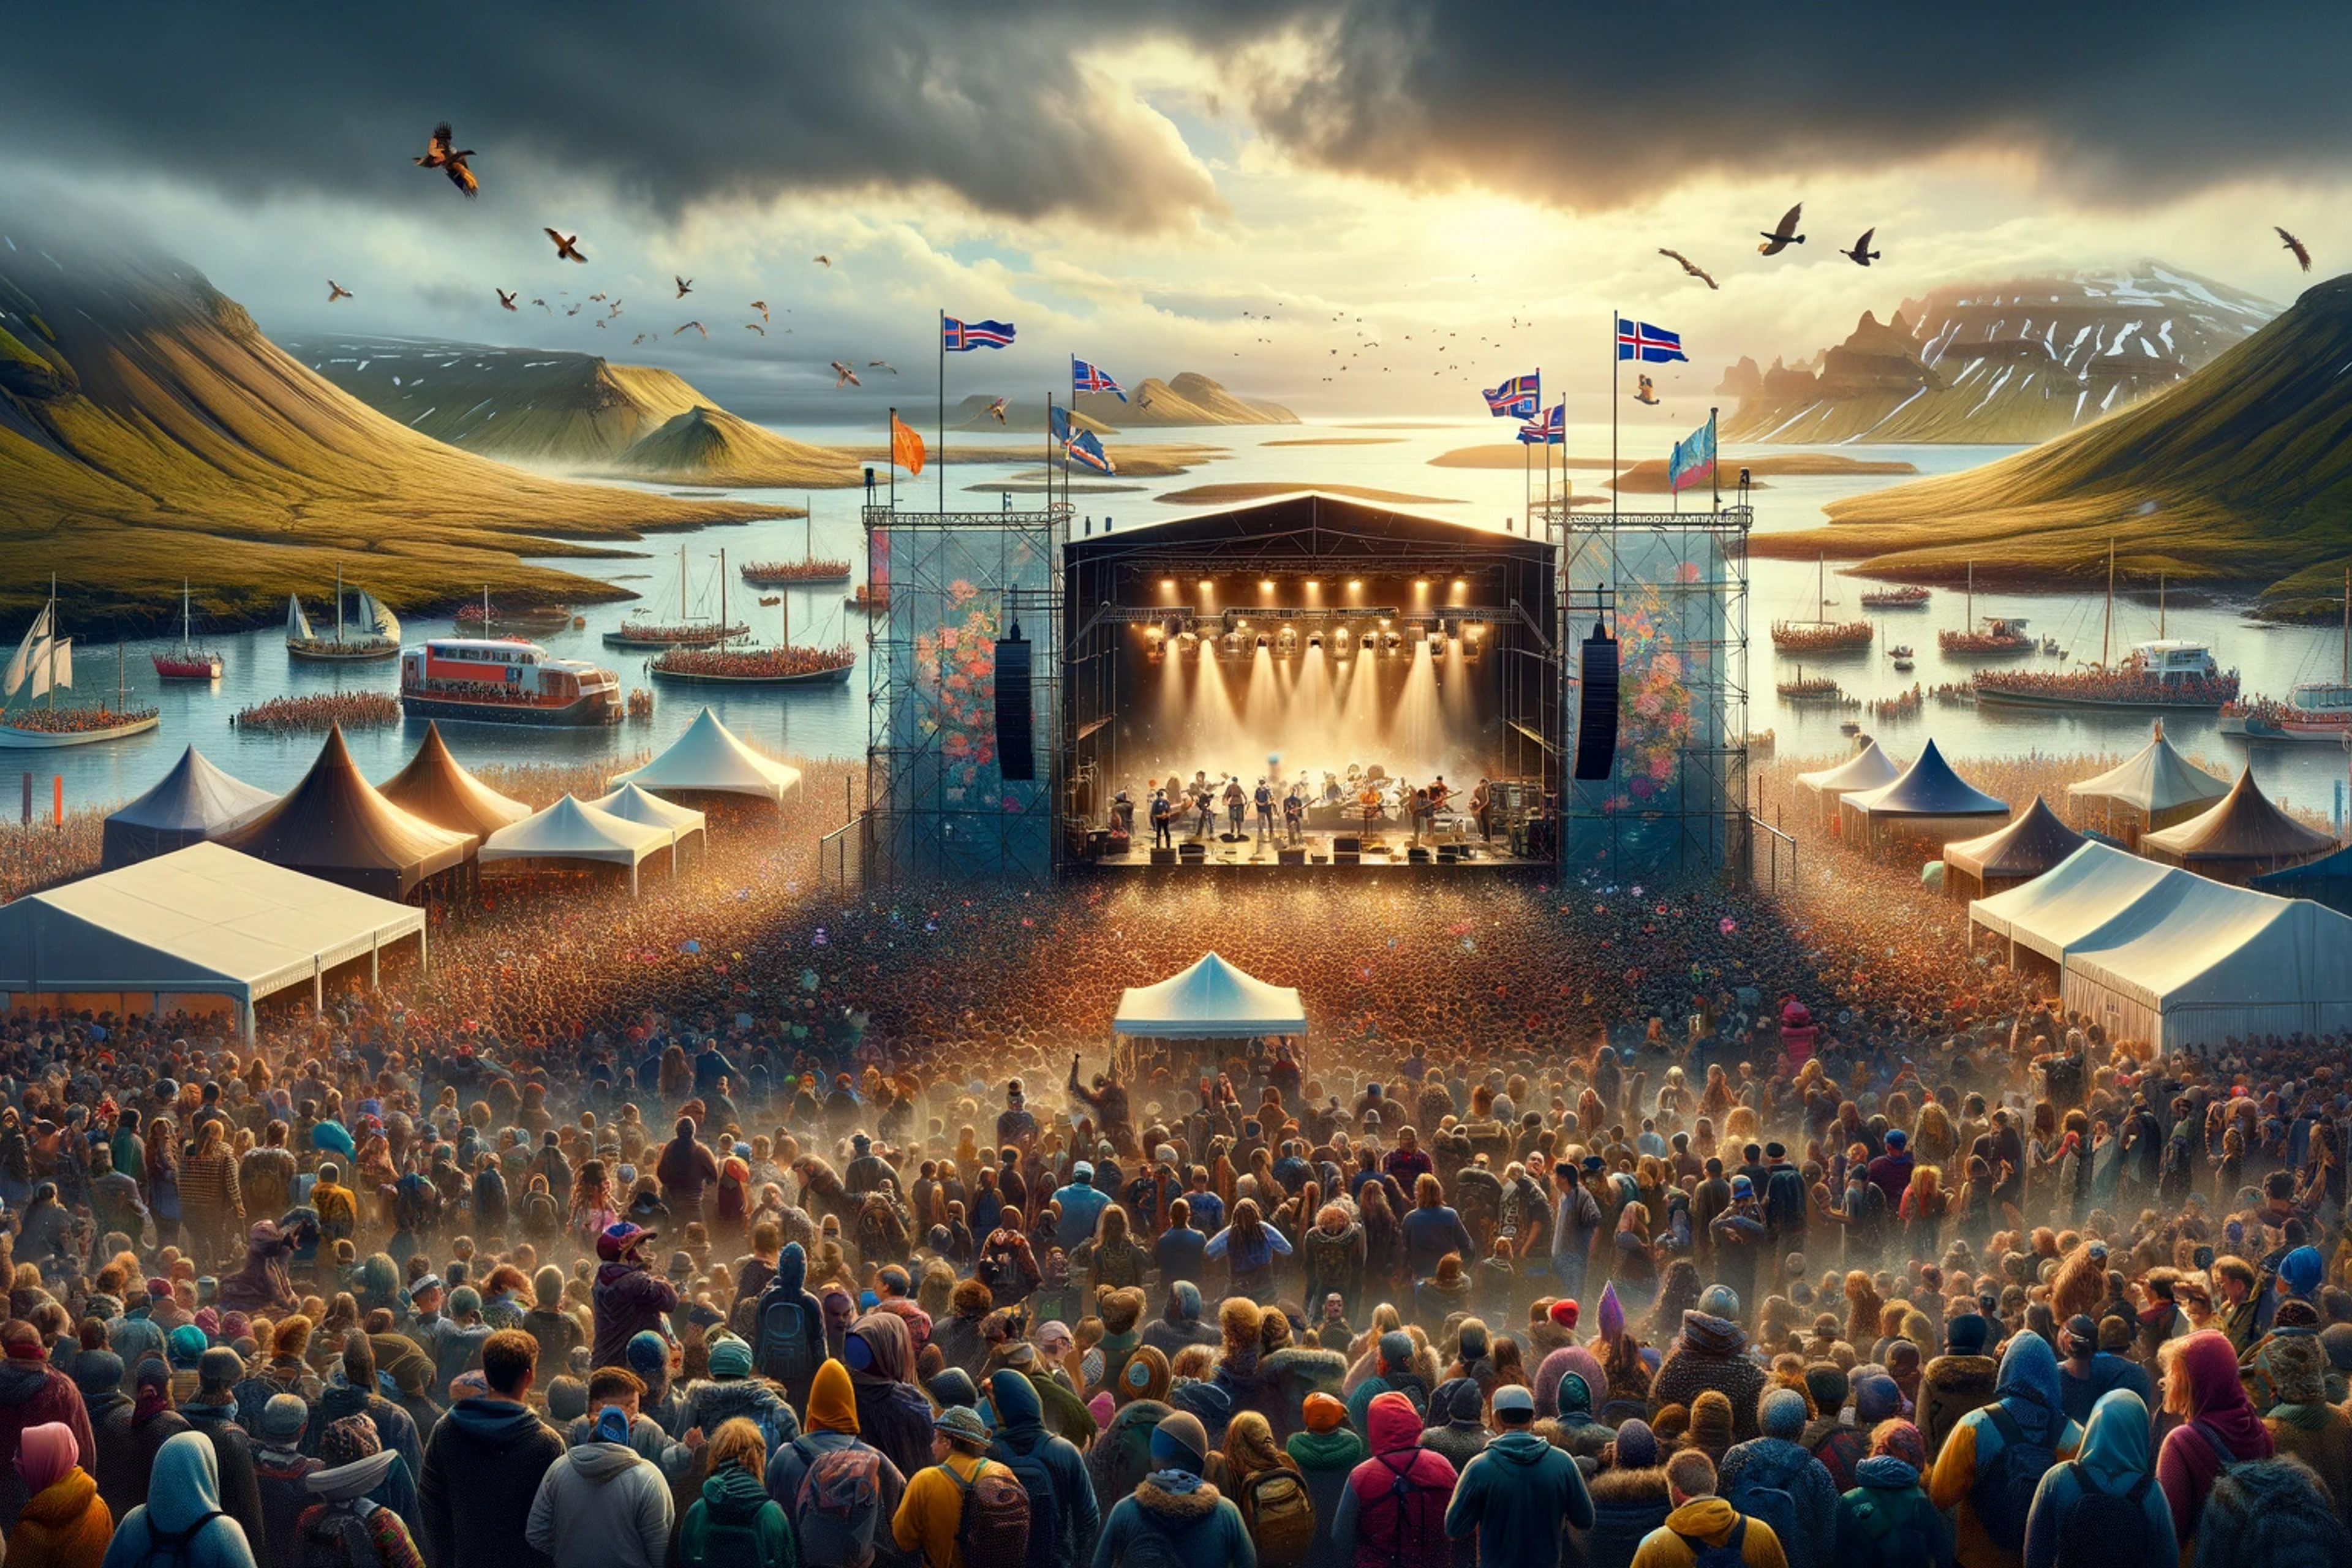 Icelandic music festival in July during the warmest and driest months of the year.